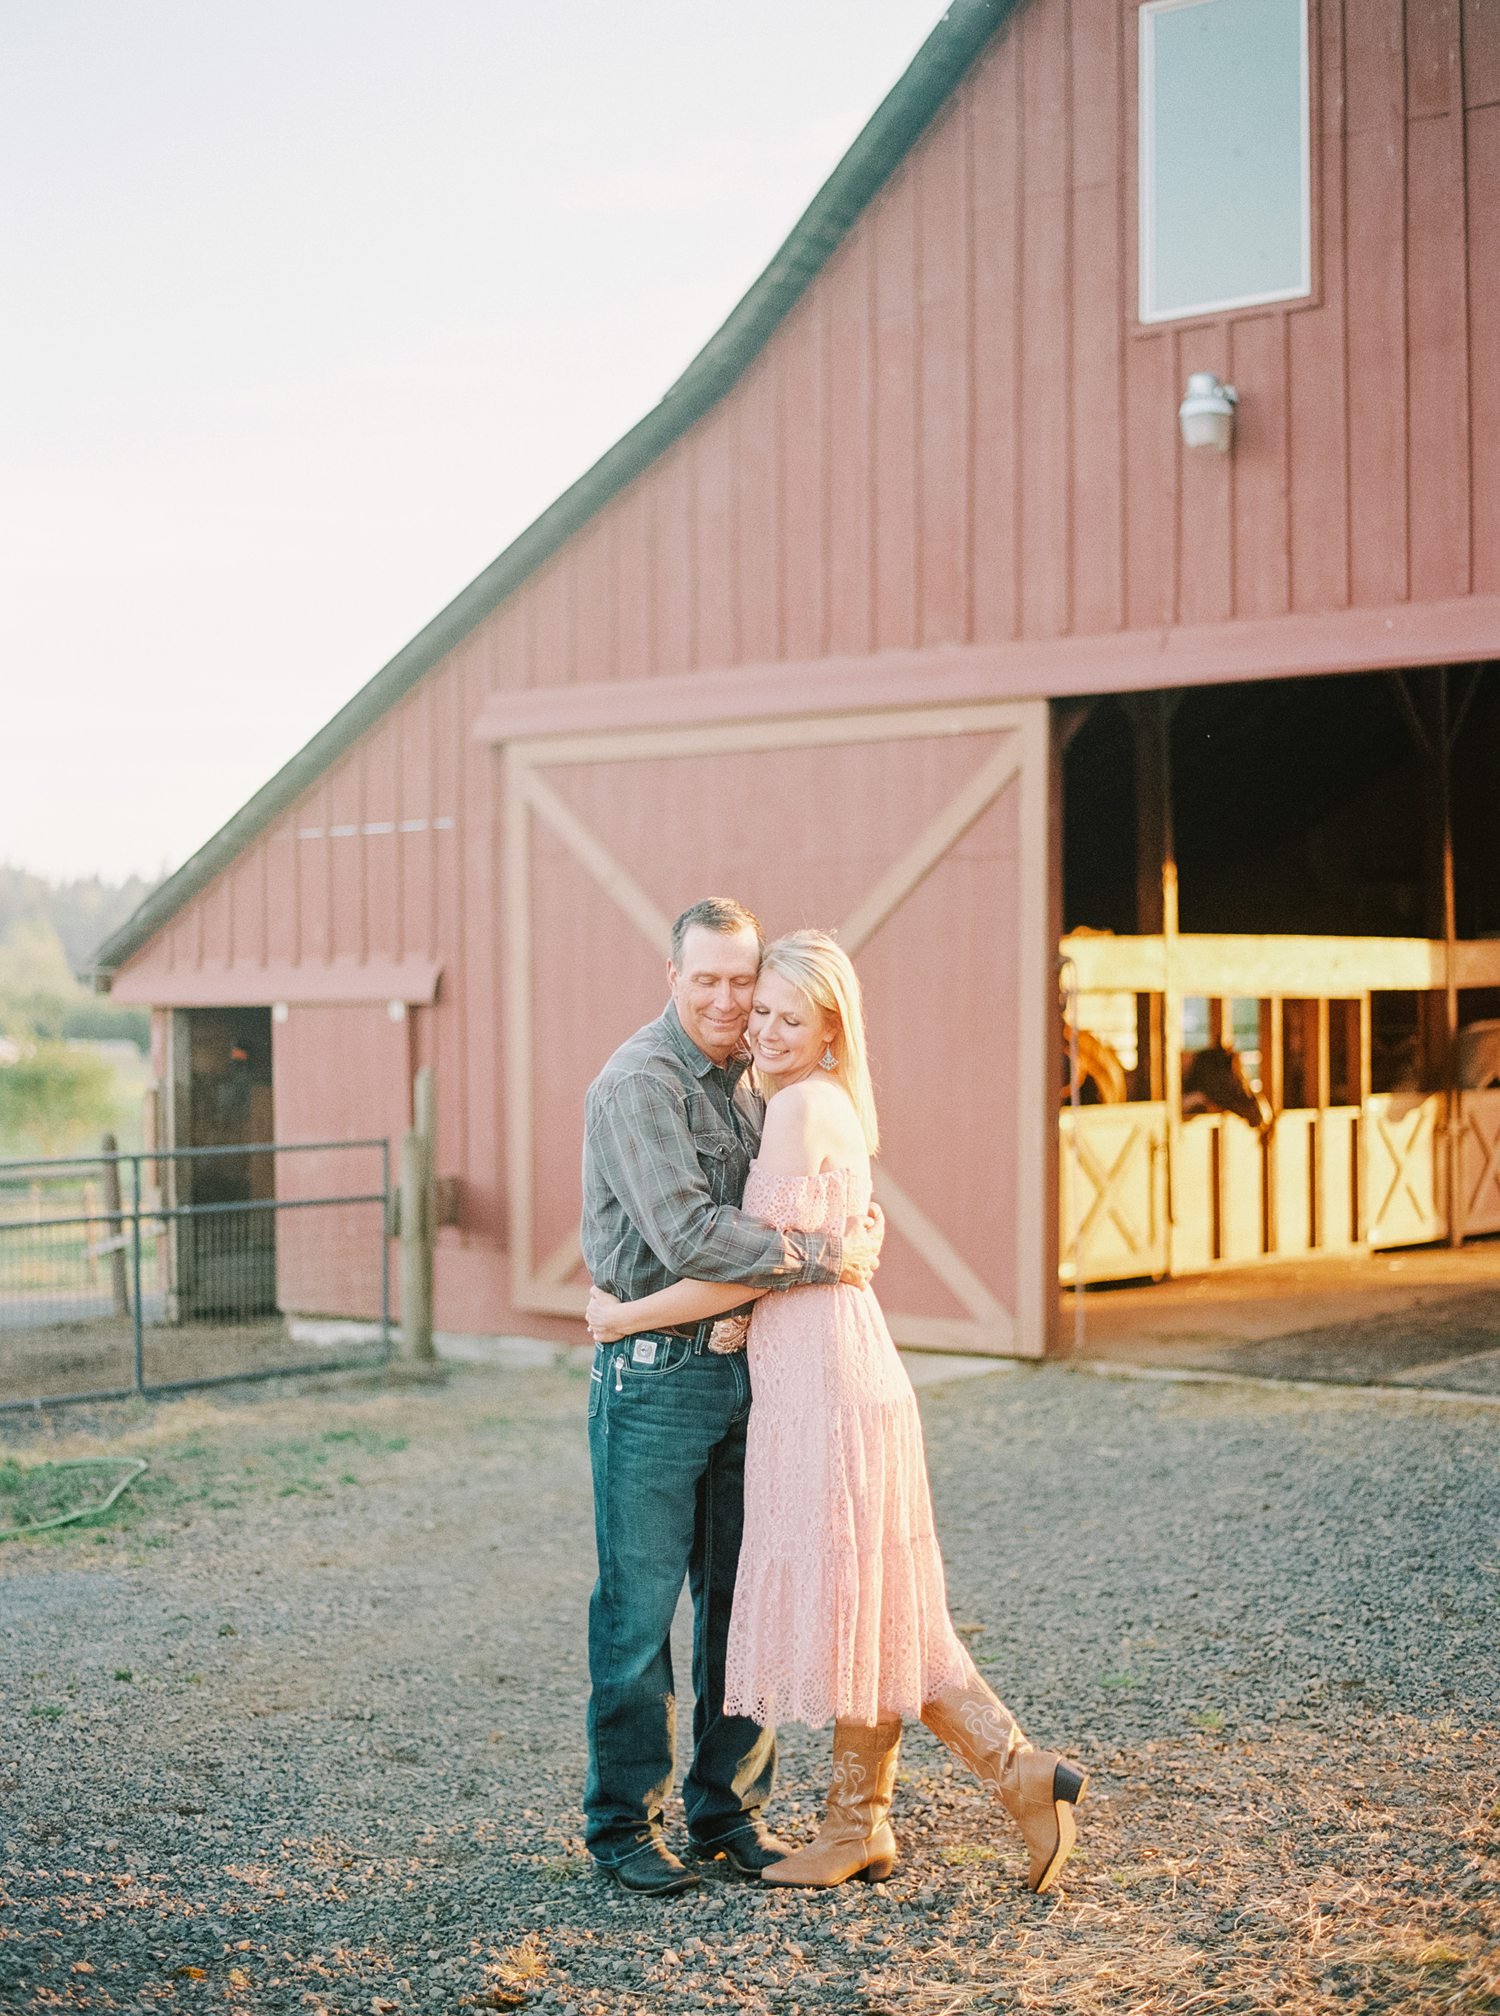 engagement session by the barn where wedding will take place